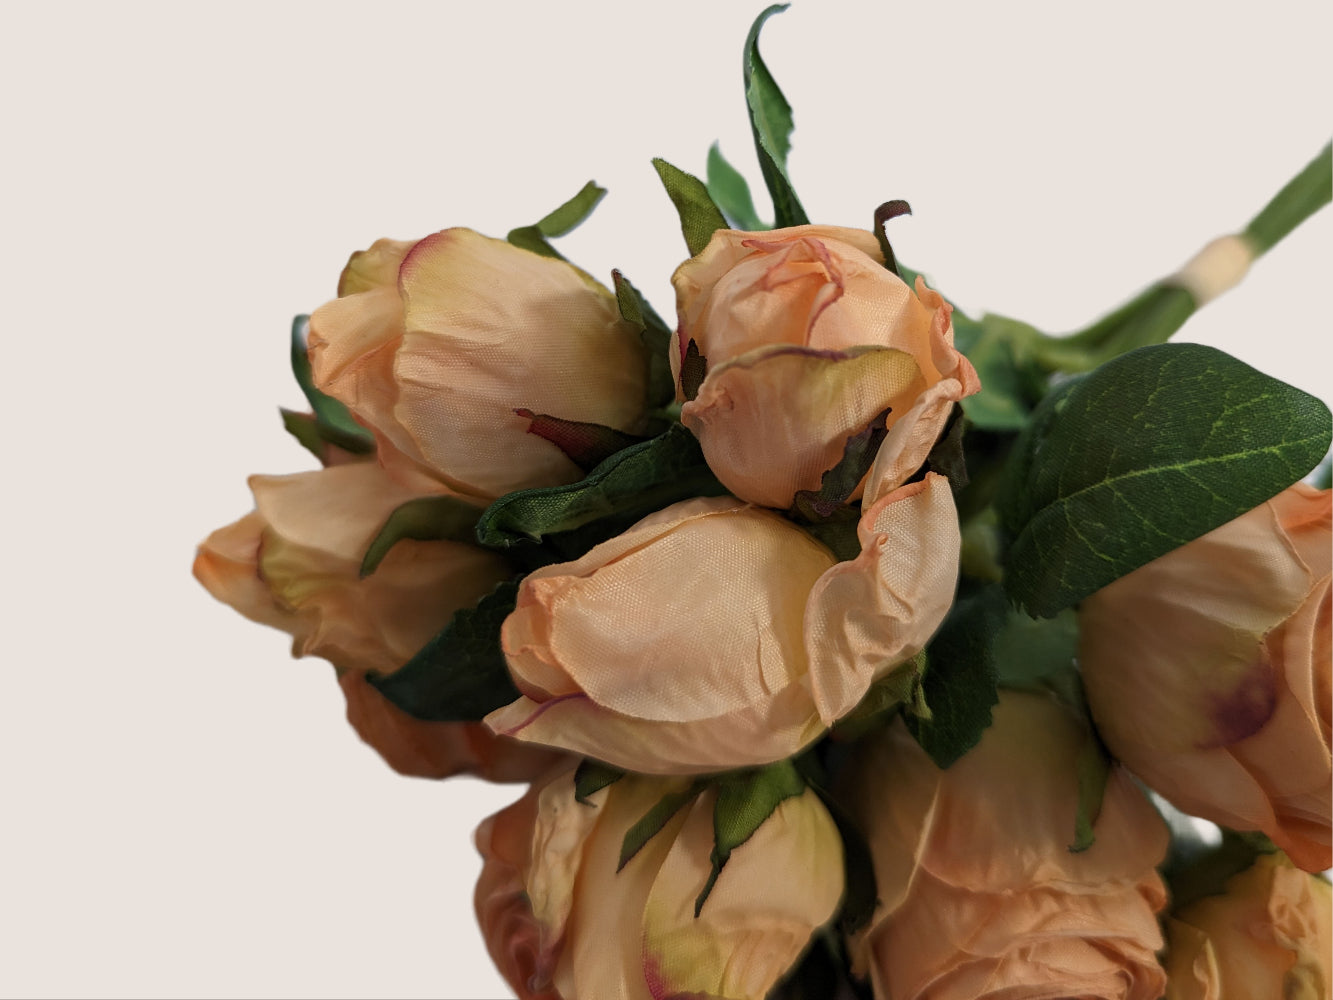 Dried Preserved Look Faux Roses in Light Pink - 17